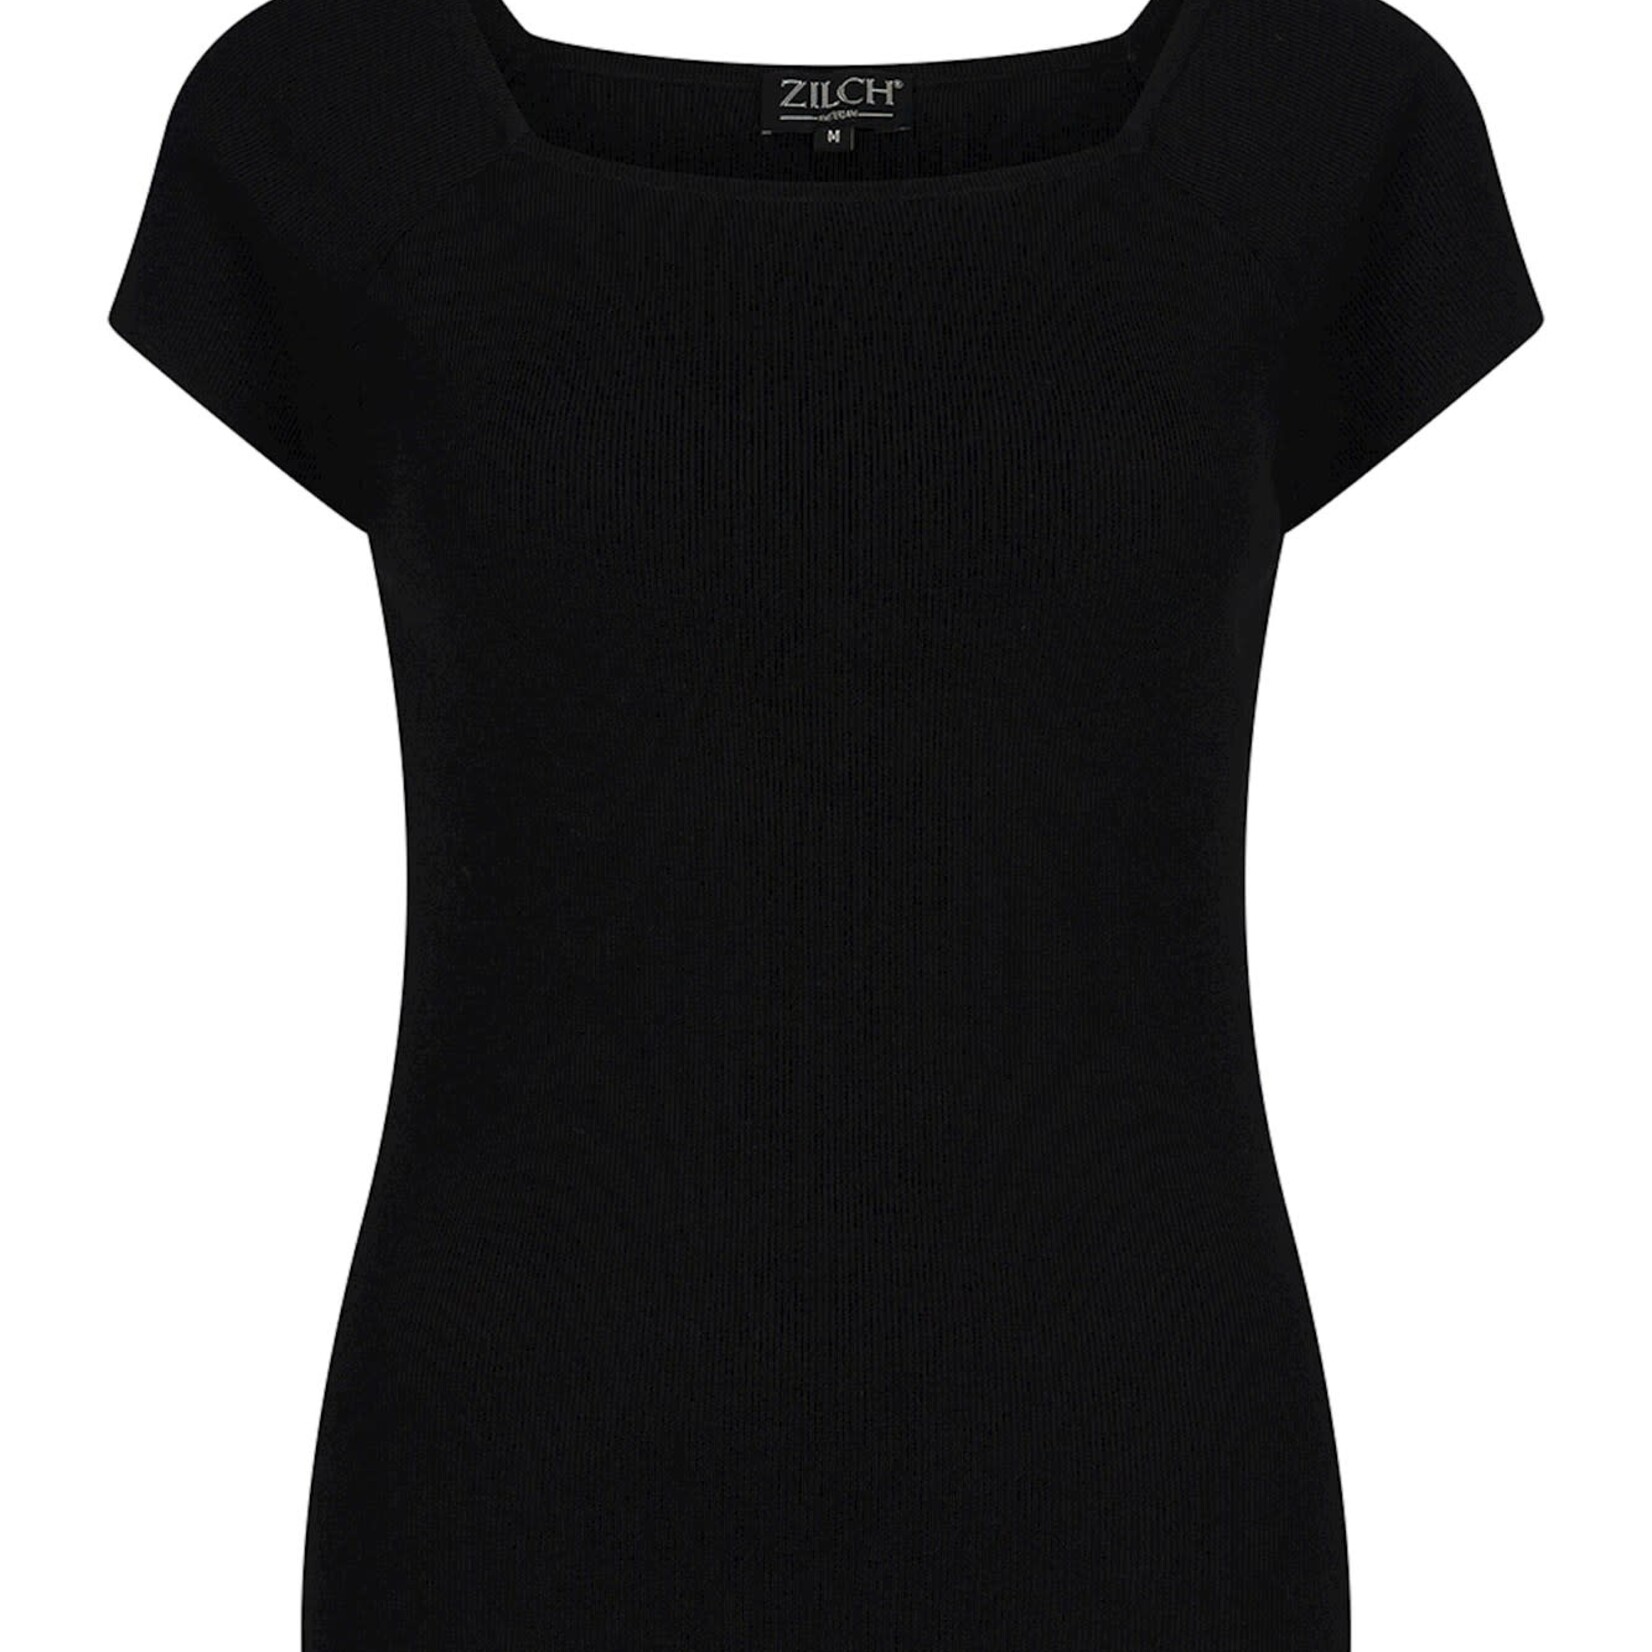 ZILCH ZILCH  SHORT SLEEVE BAMBOO TOP BLACK